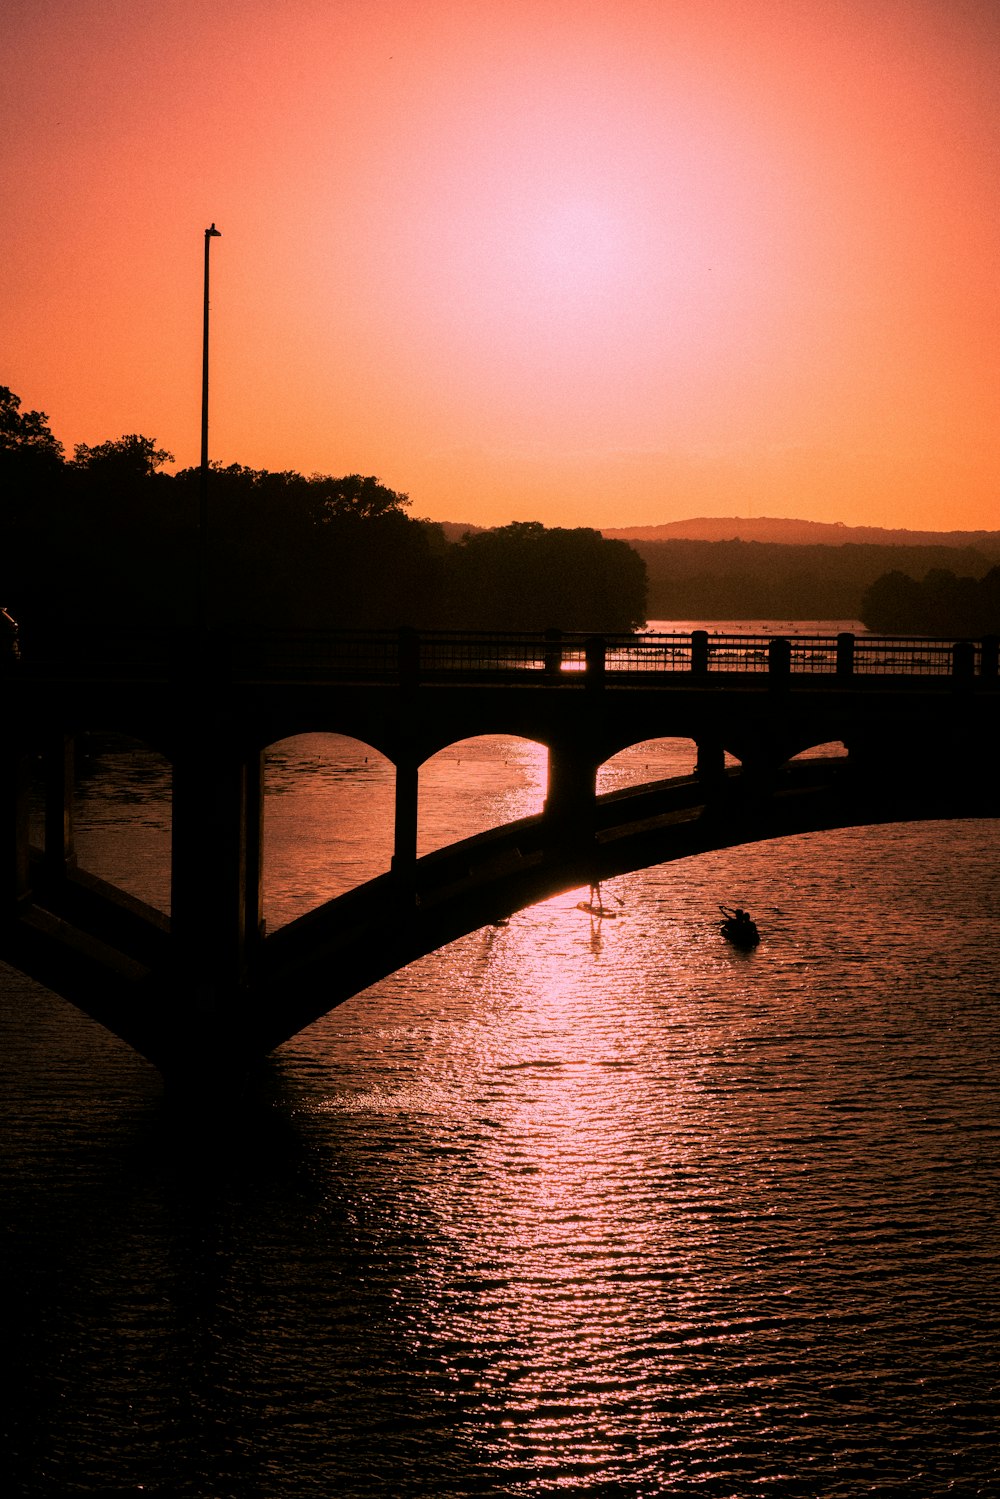 silhouette of bridge over body of water during sunset